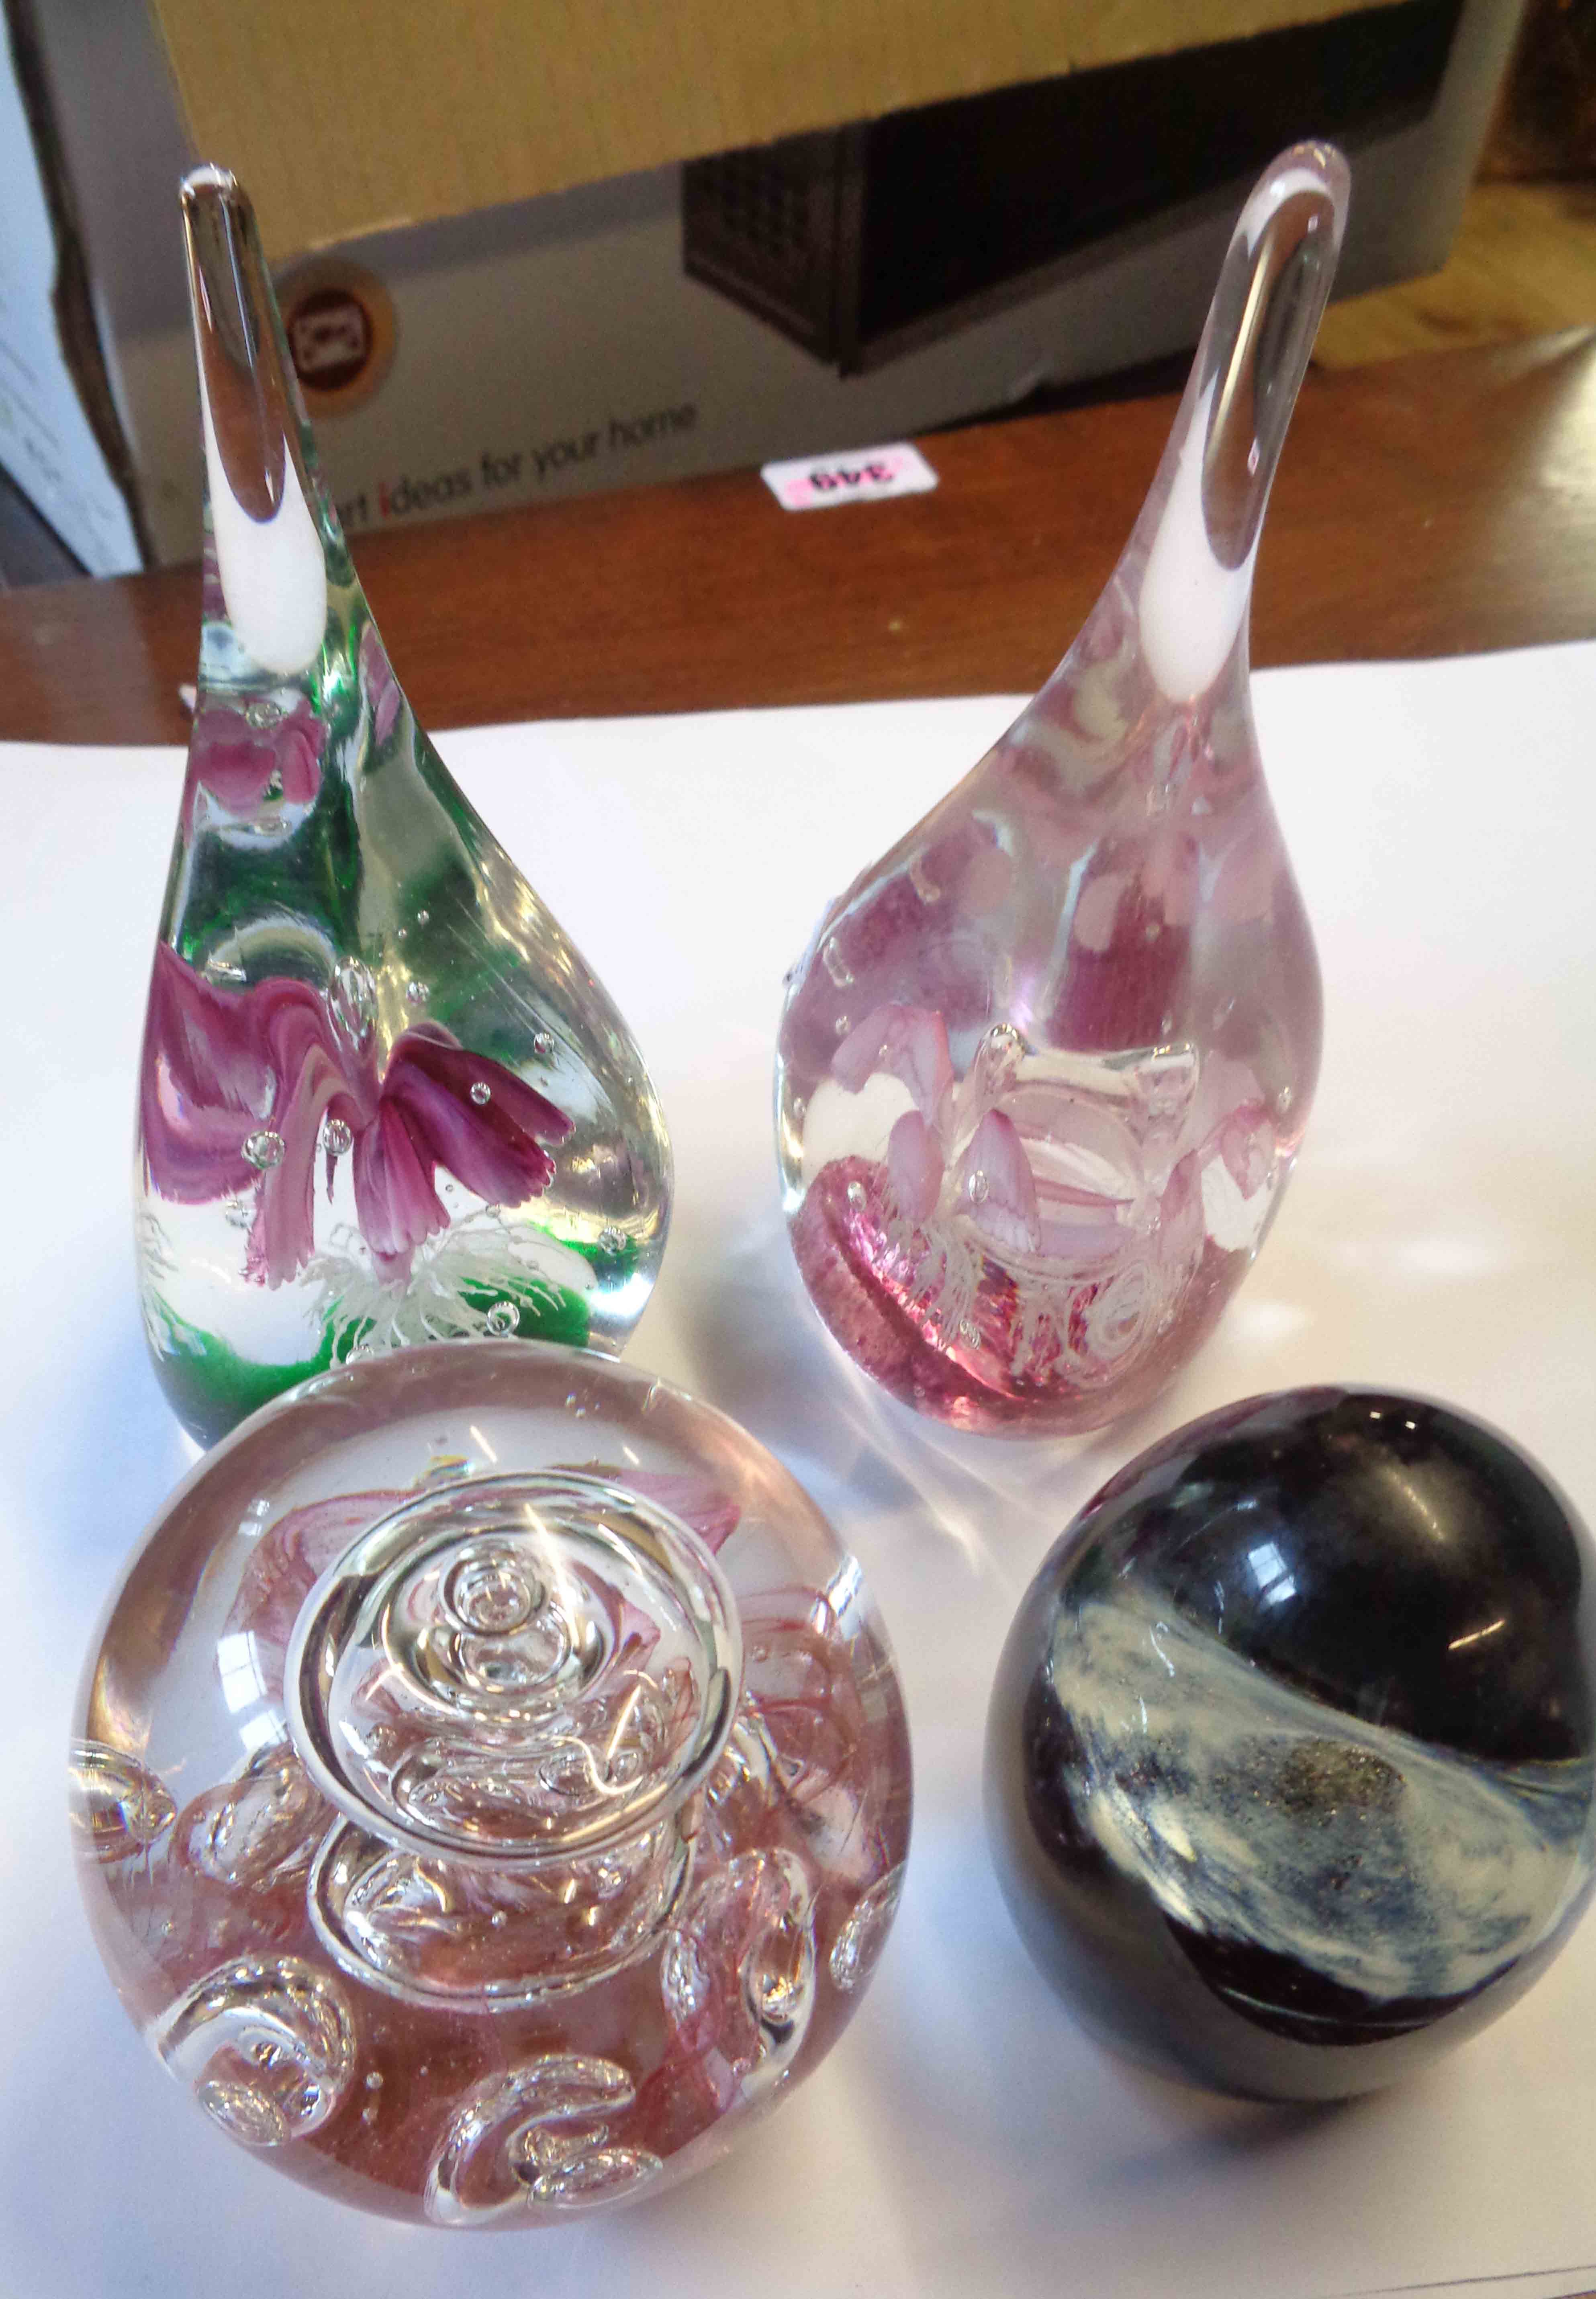 A box containing four glass paperweights